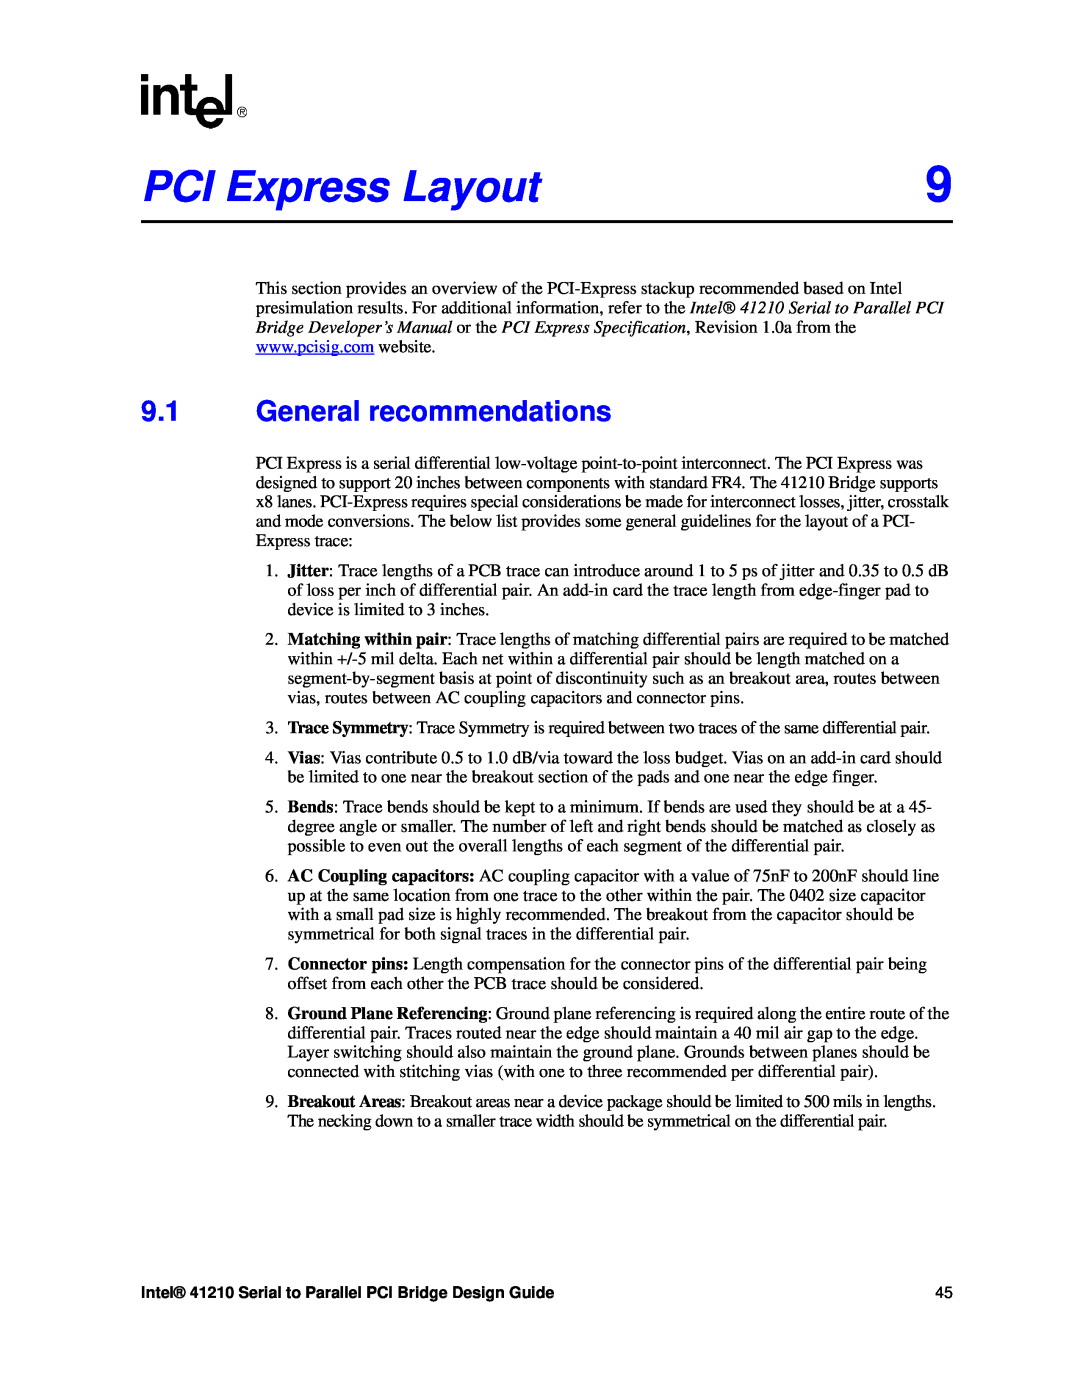 Intel 41210 manual PCI Express Layout, General recommendations 